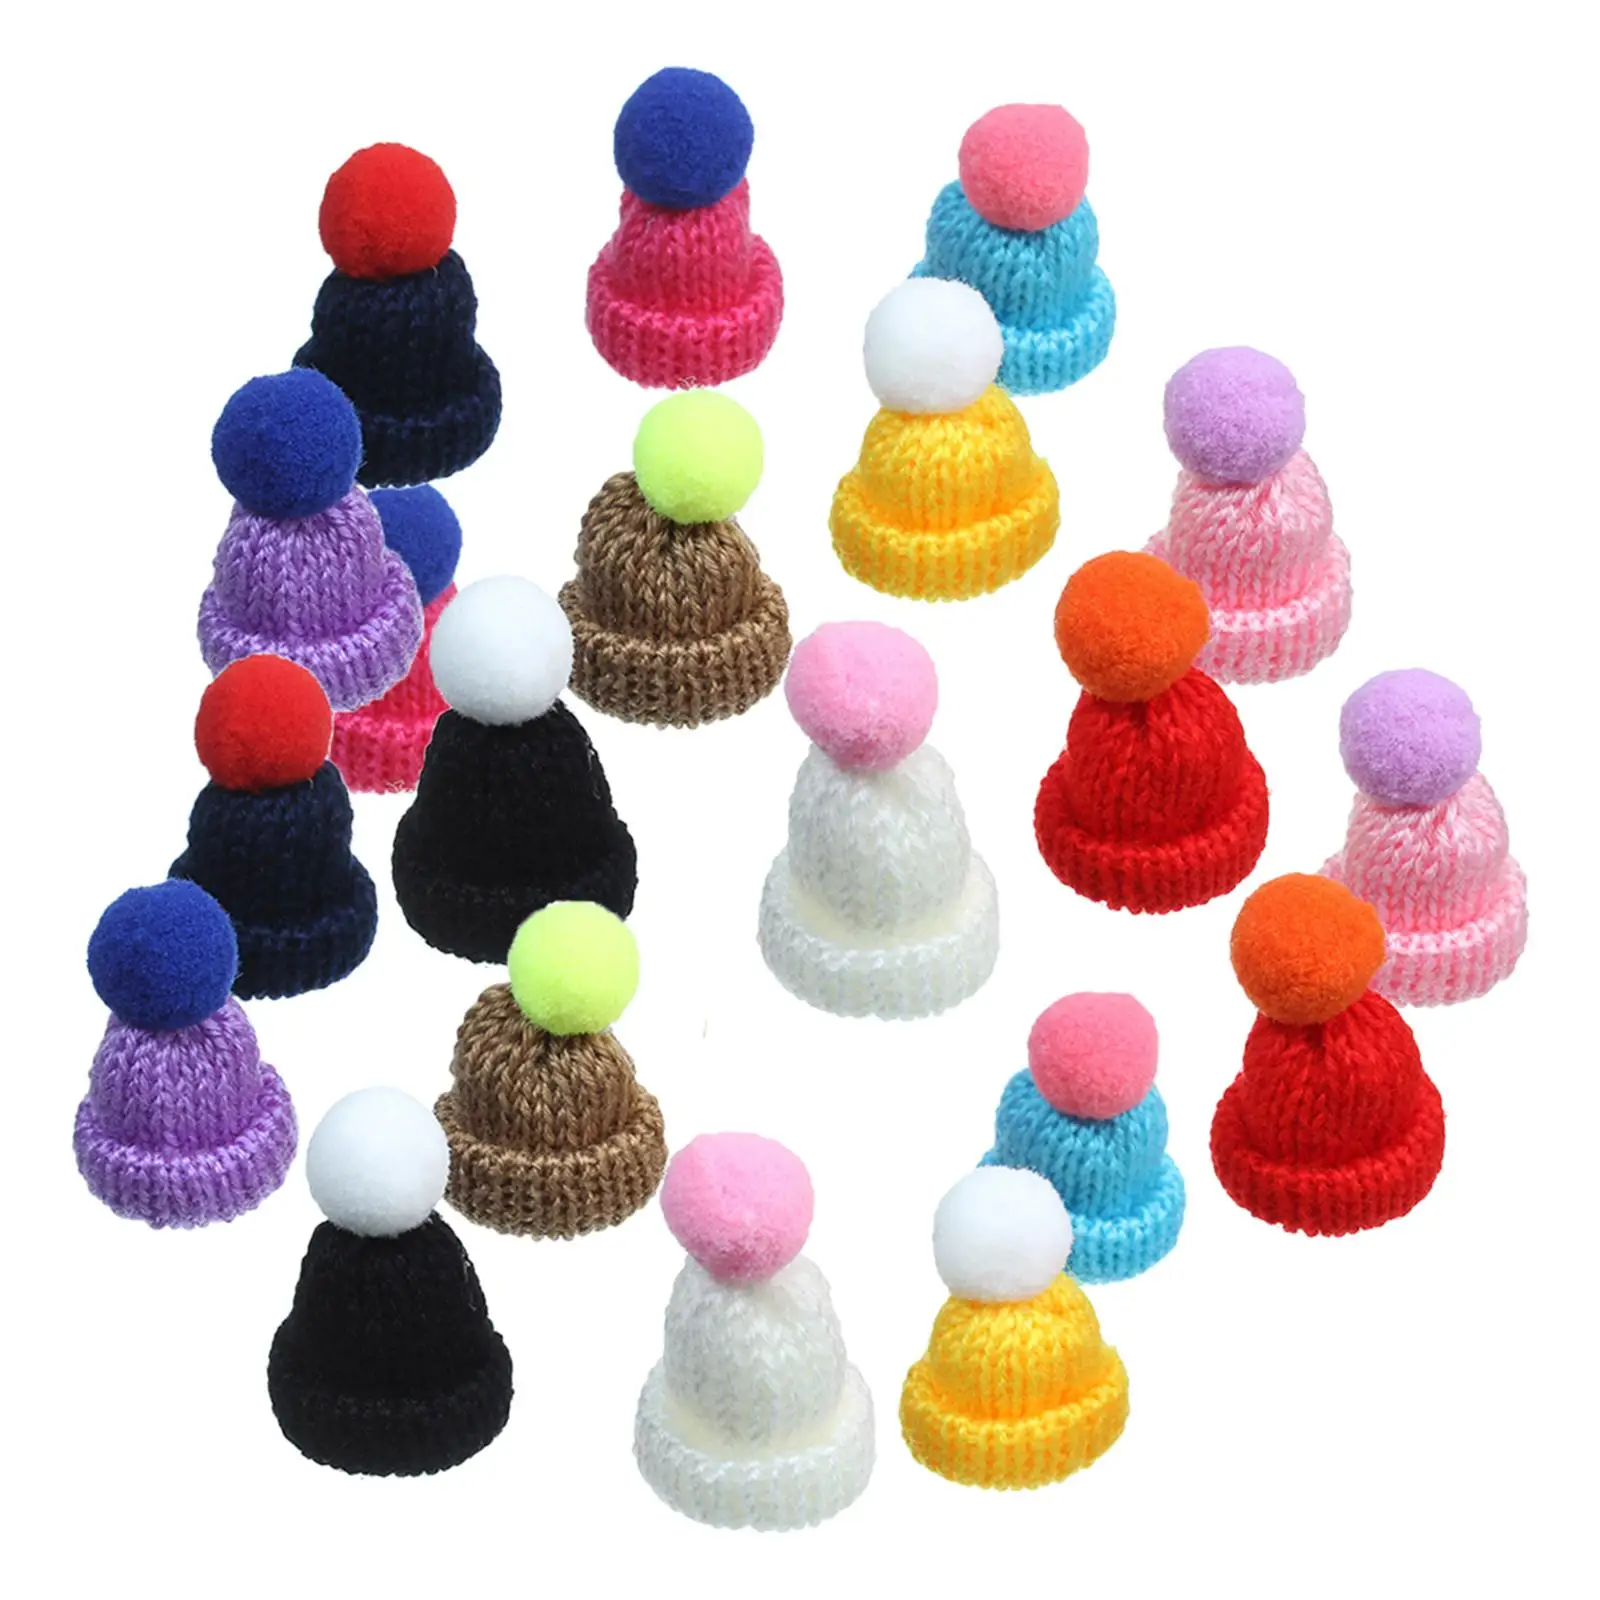 20 Pieces Cute Mini Christmas Knit Hat Doll Hats Small Caps Hair Accessories Yarn Christmas Mini Knitting Hats for Decoration